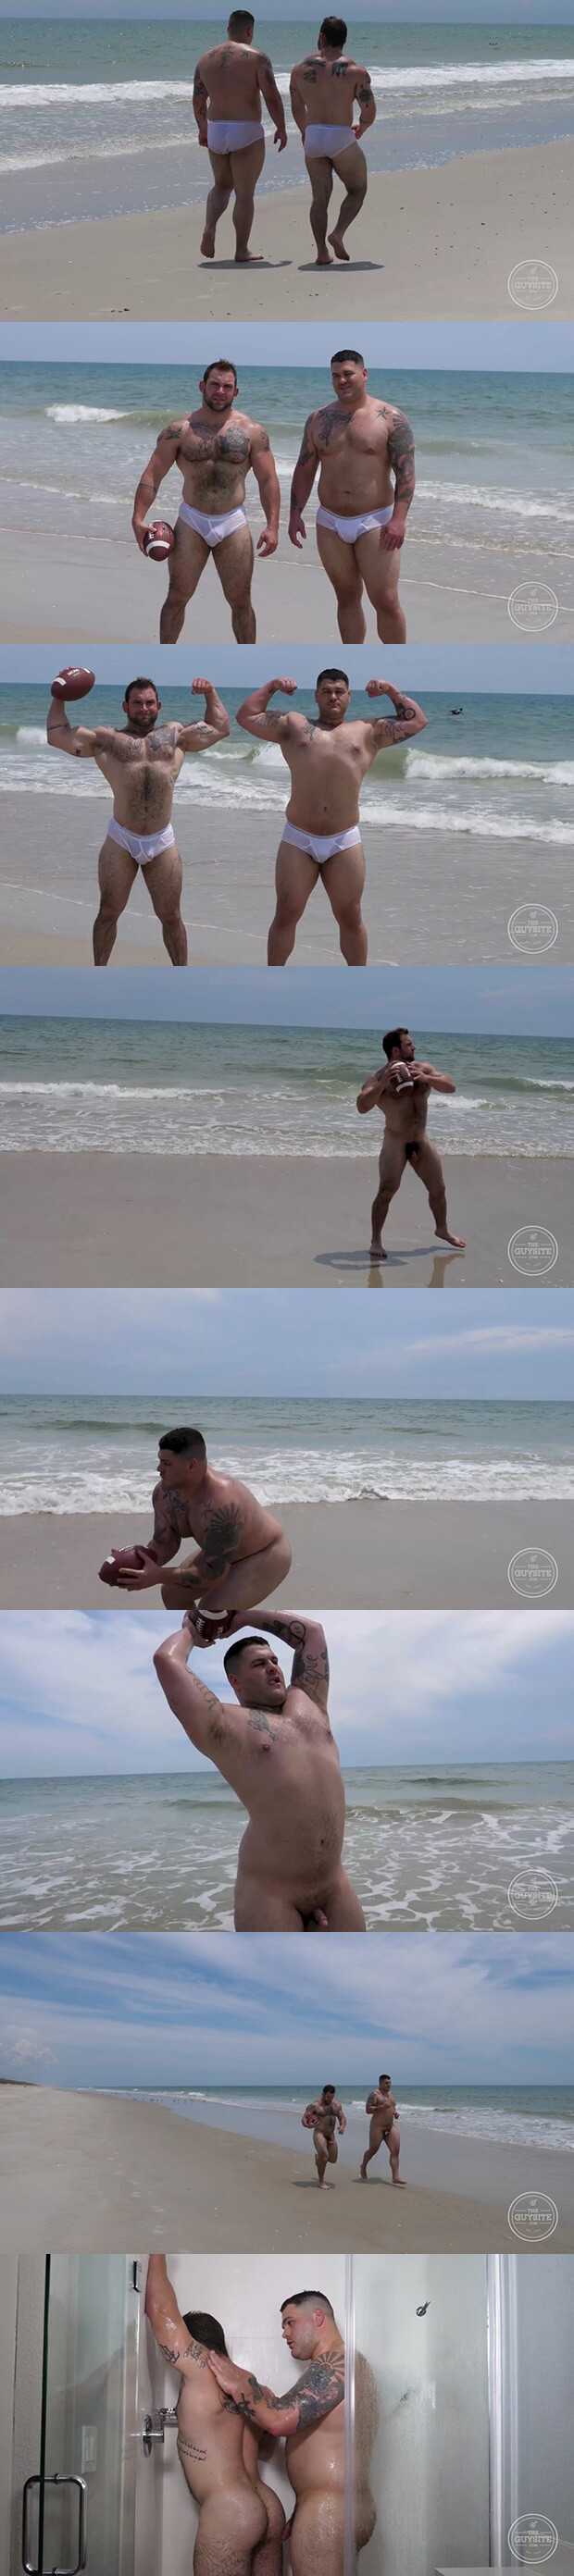 The Guy Site | Naked Football Players At The Beach, Pt. 2